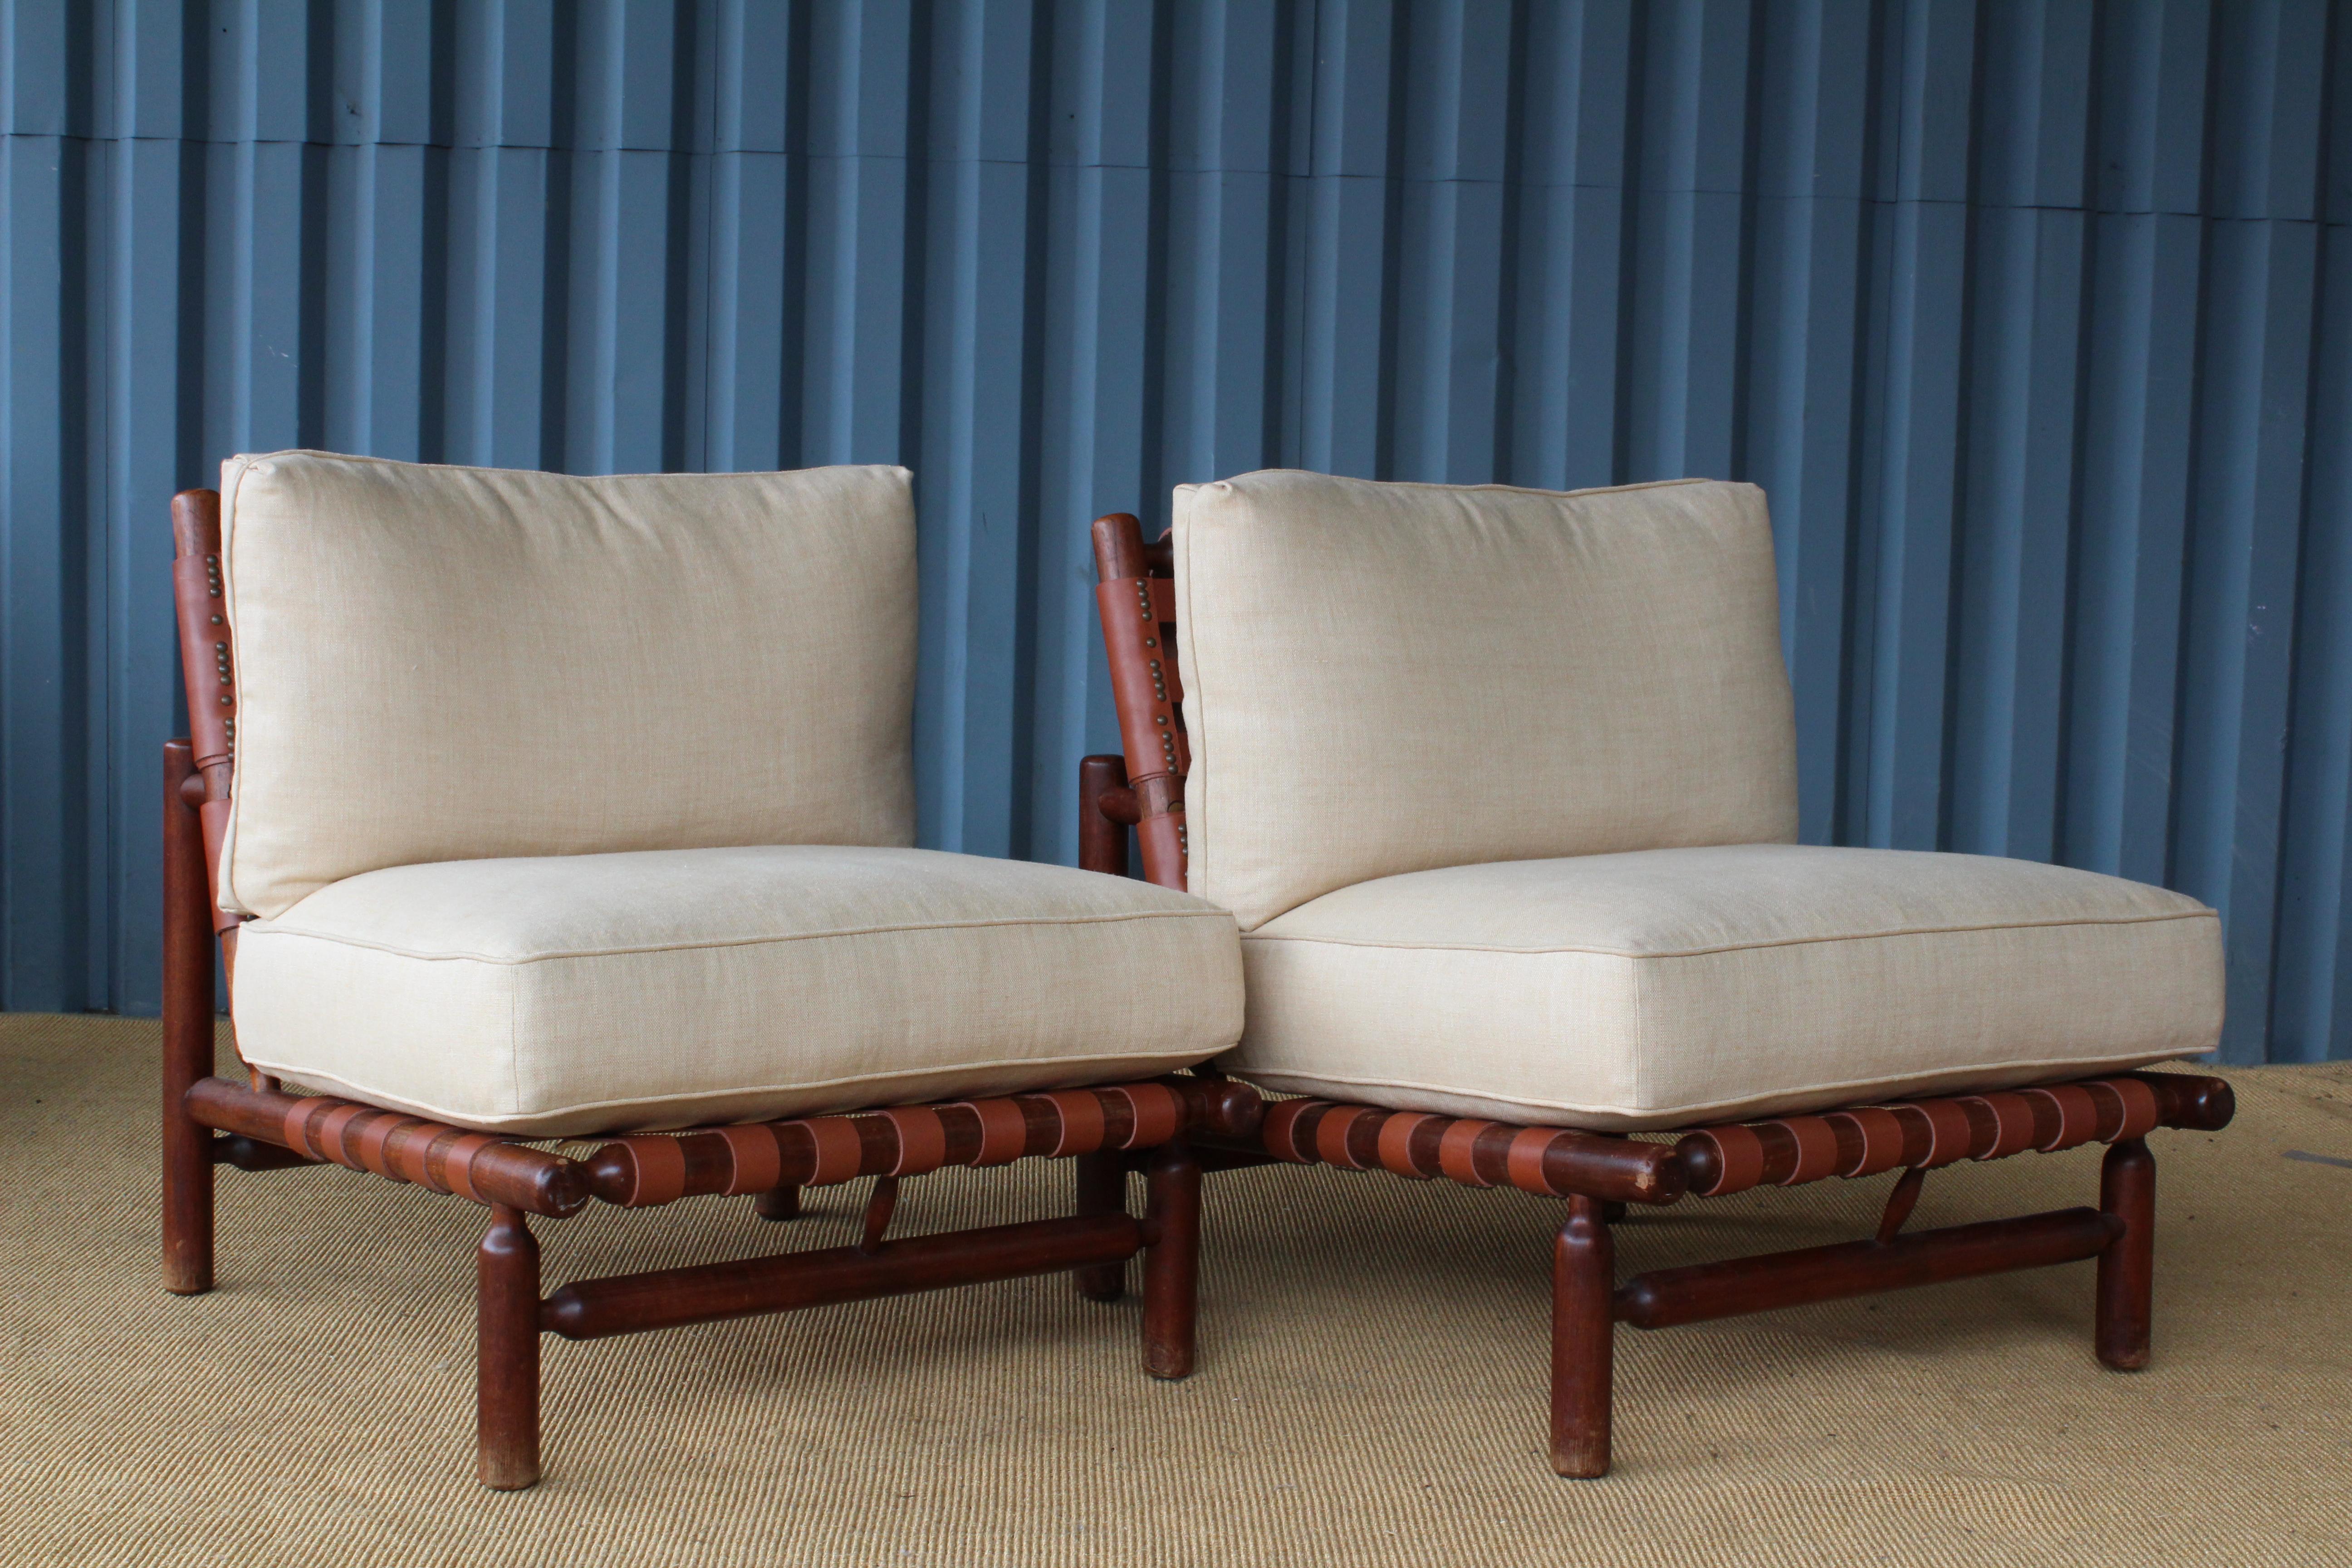 Pair of lounge chairs designed by Ilmari Tapiovaara for Esposizione La Permanente Mobili, Italy, 1957. The pair have new leather straps and new linen cushions. Walnut frames show age appropriate signs of wear.